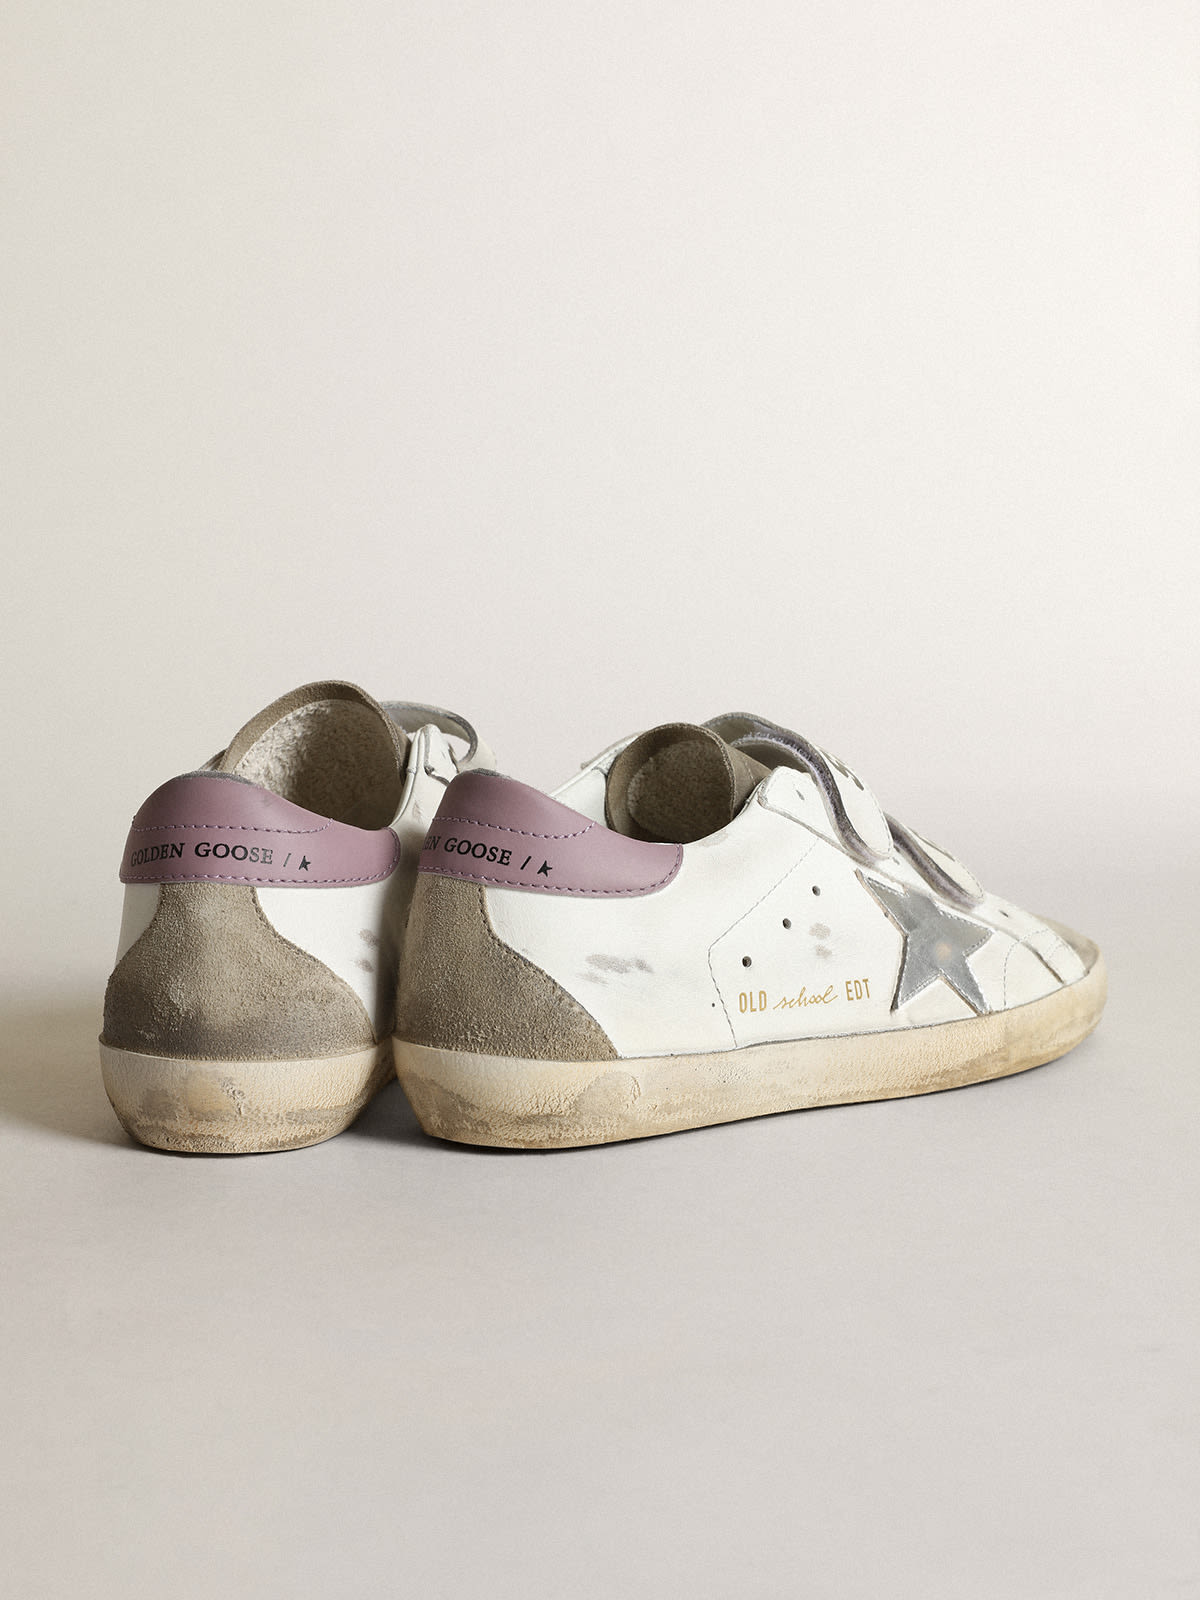 Golden Goose - Old School sneakers with silver laminated leather star and dove-gray suede inserts in 